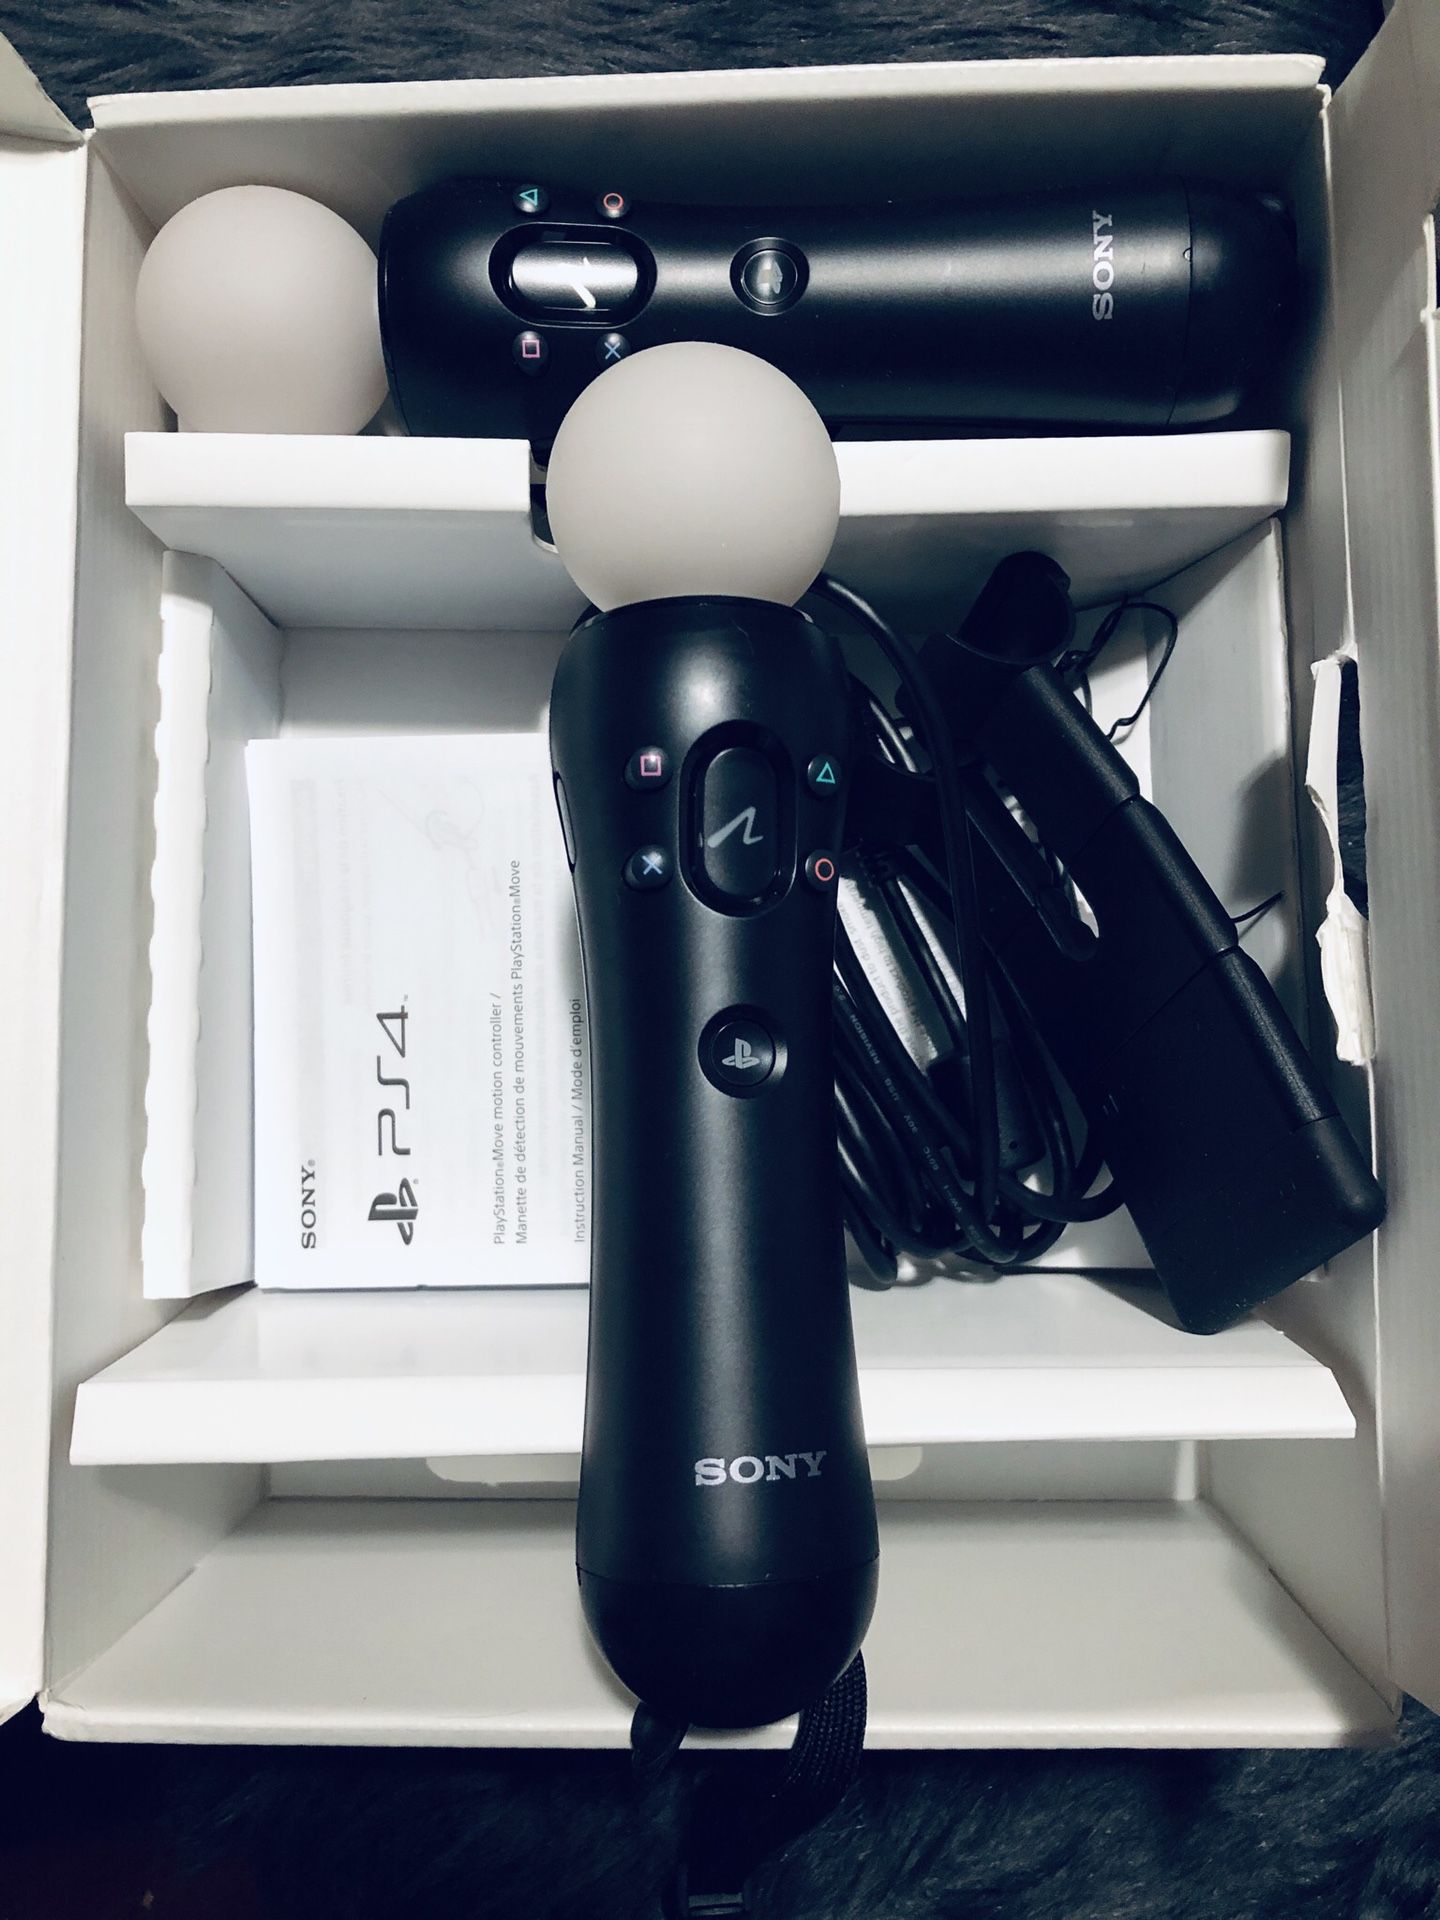 Sony Playstation Move Motion Controllers for PS4 (Model CECH-ZCM1U)